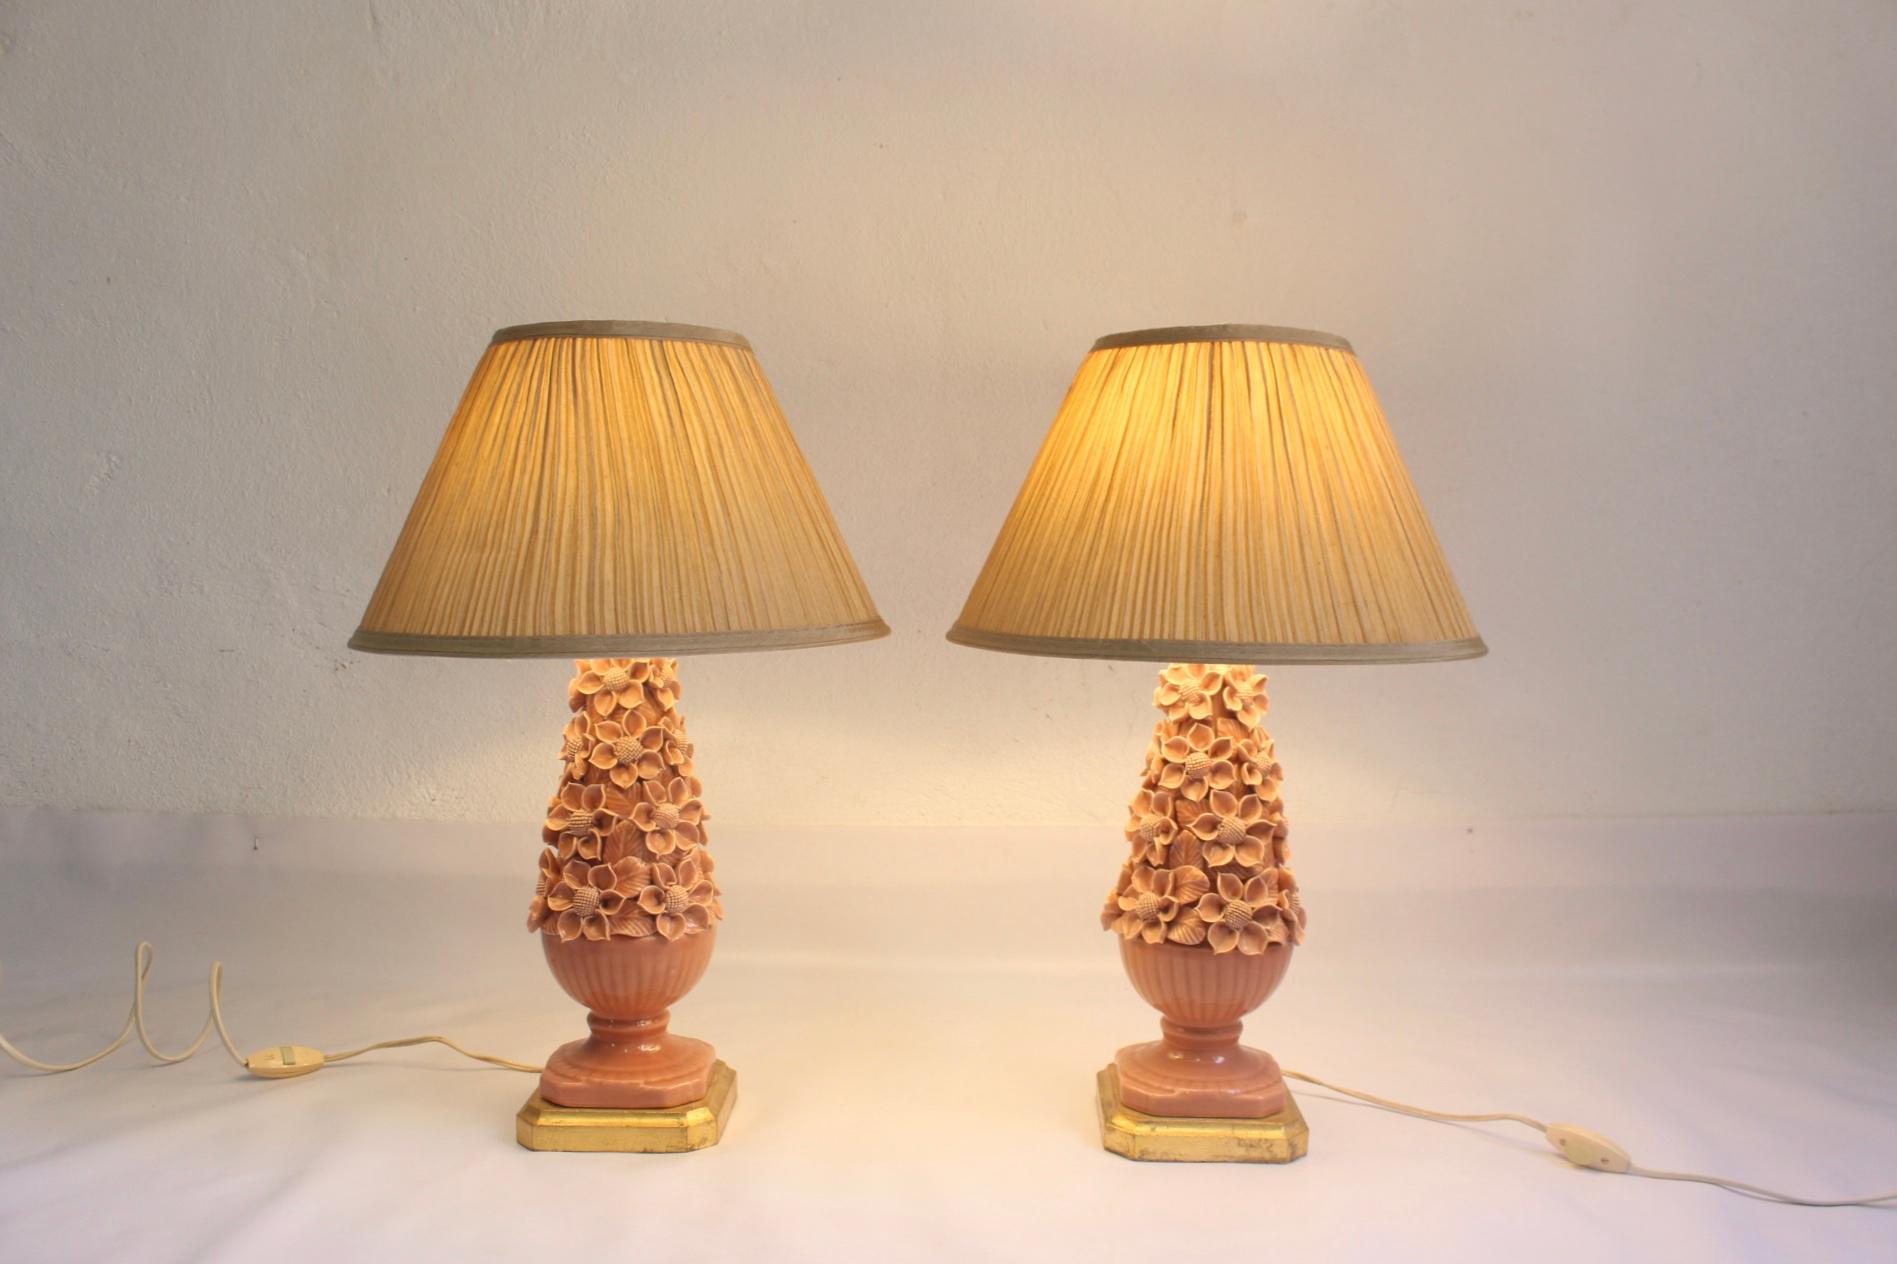 Set of 2 handmade pink/salmon ceramic table lamps, Manises, Valencia, Spain. Gilded wooden bases and new fabric shades hand-sewing, also made in Spain at the time but, brand new, never used before. Pictures with 3 different intensity bulbs.